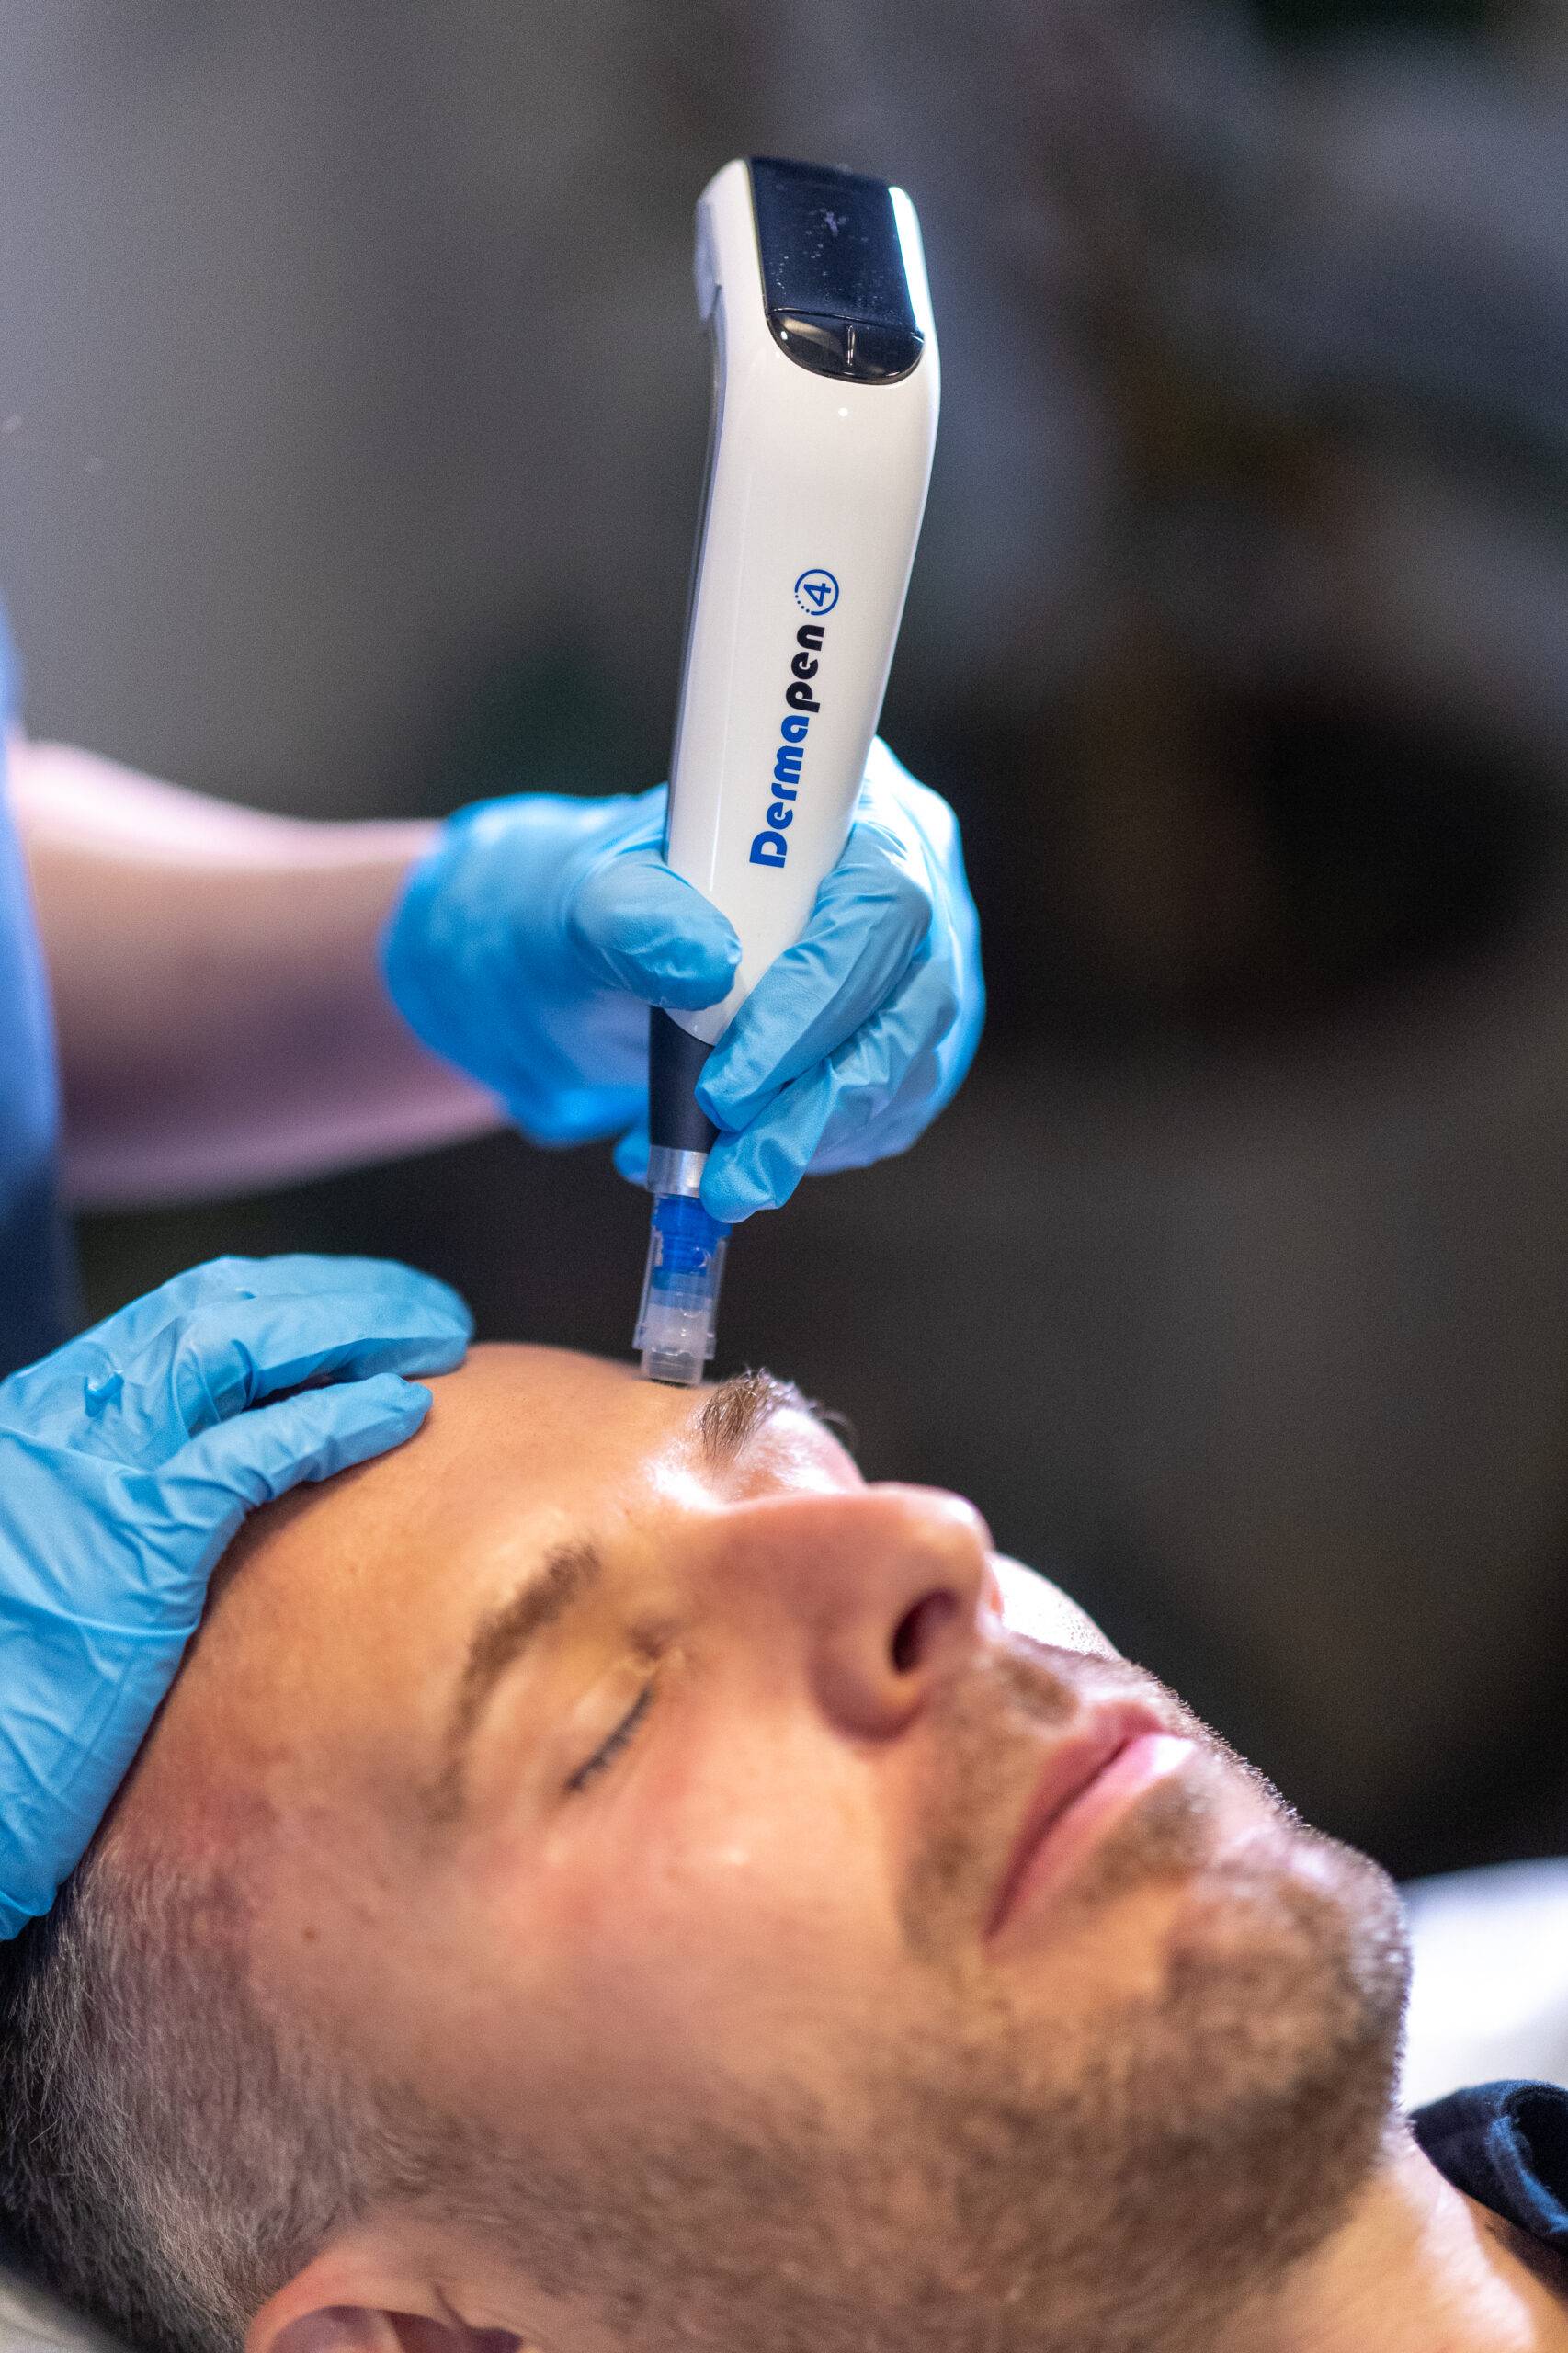 A man reclines with closed eyes while a healthcare professional wearing blue gloves uses a Dermapen 4 on his face, likely during a skin treatment procedure.